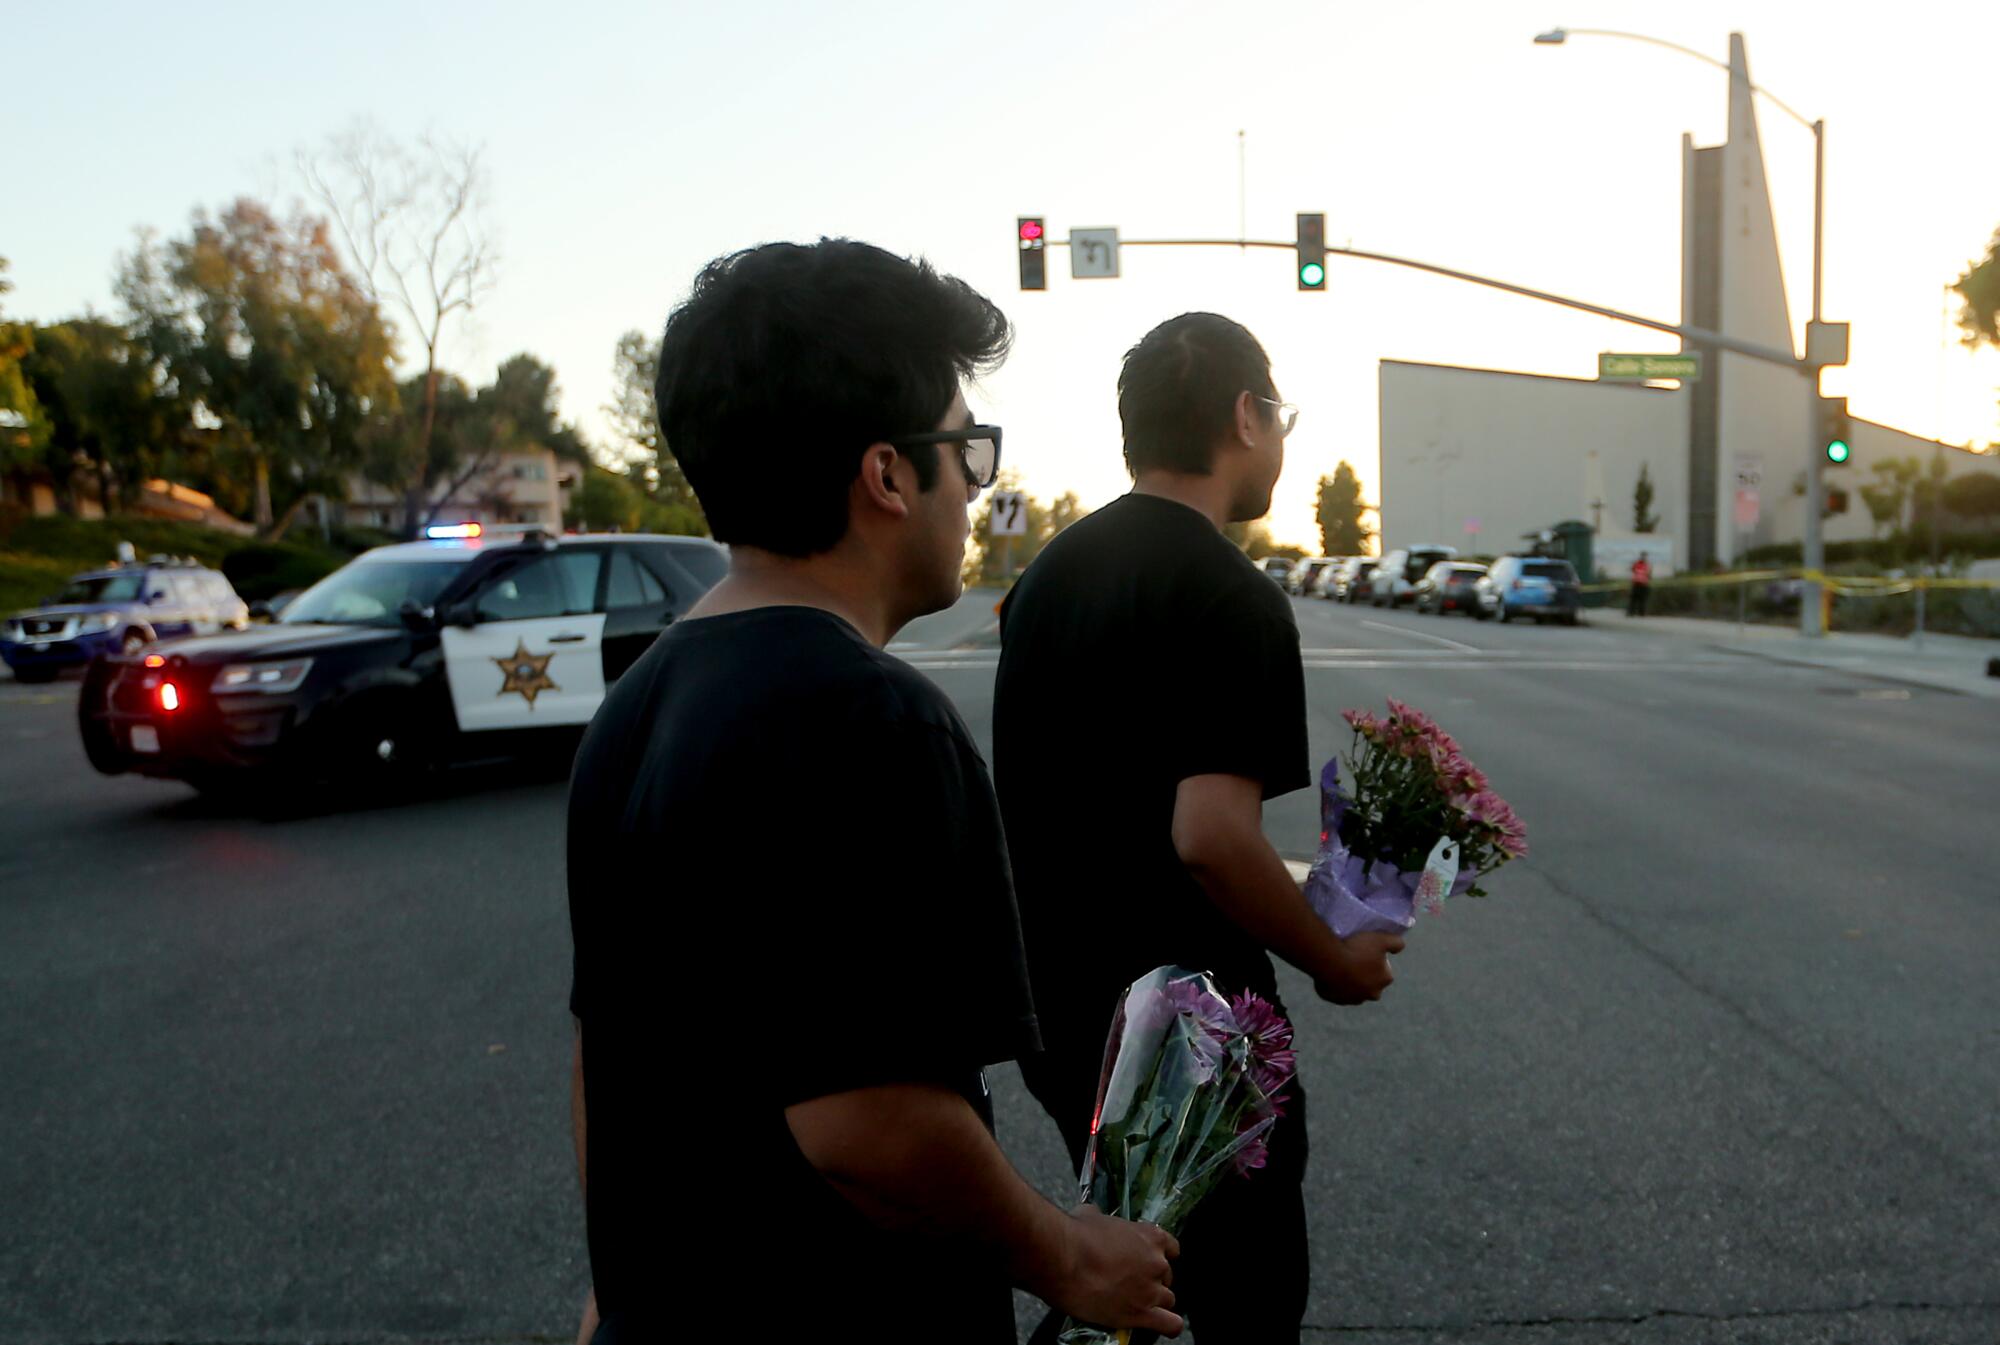 Two people holding flower bouquets while walking